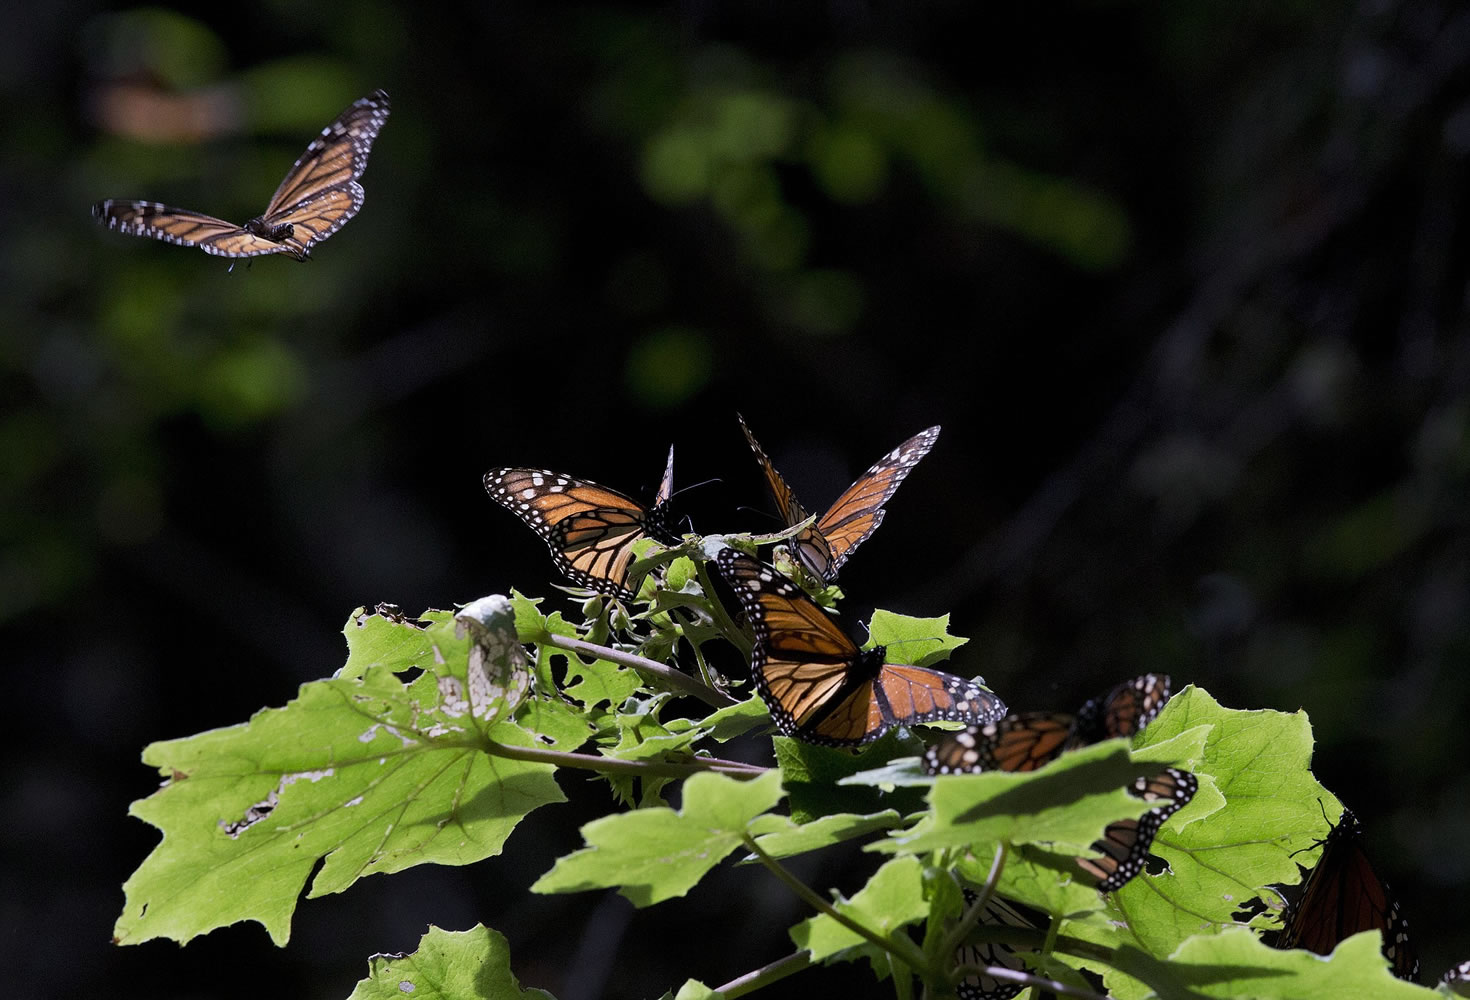 A monarch butterfly takes flight in Mexico.